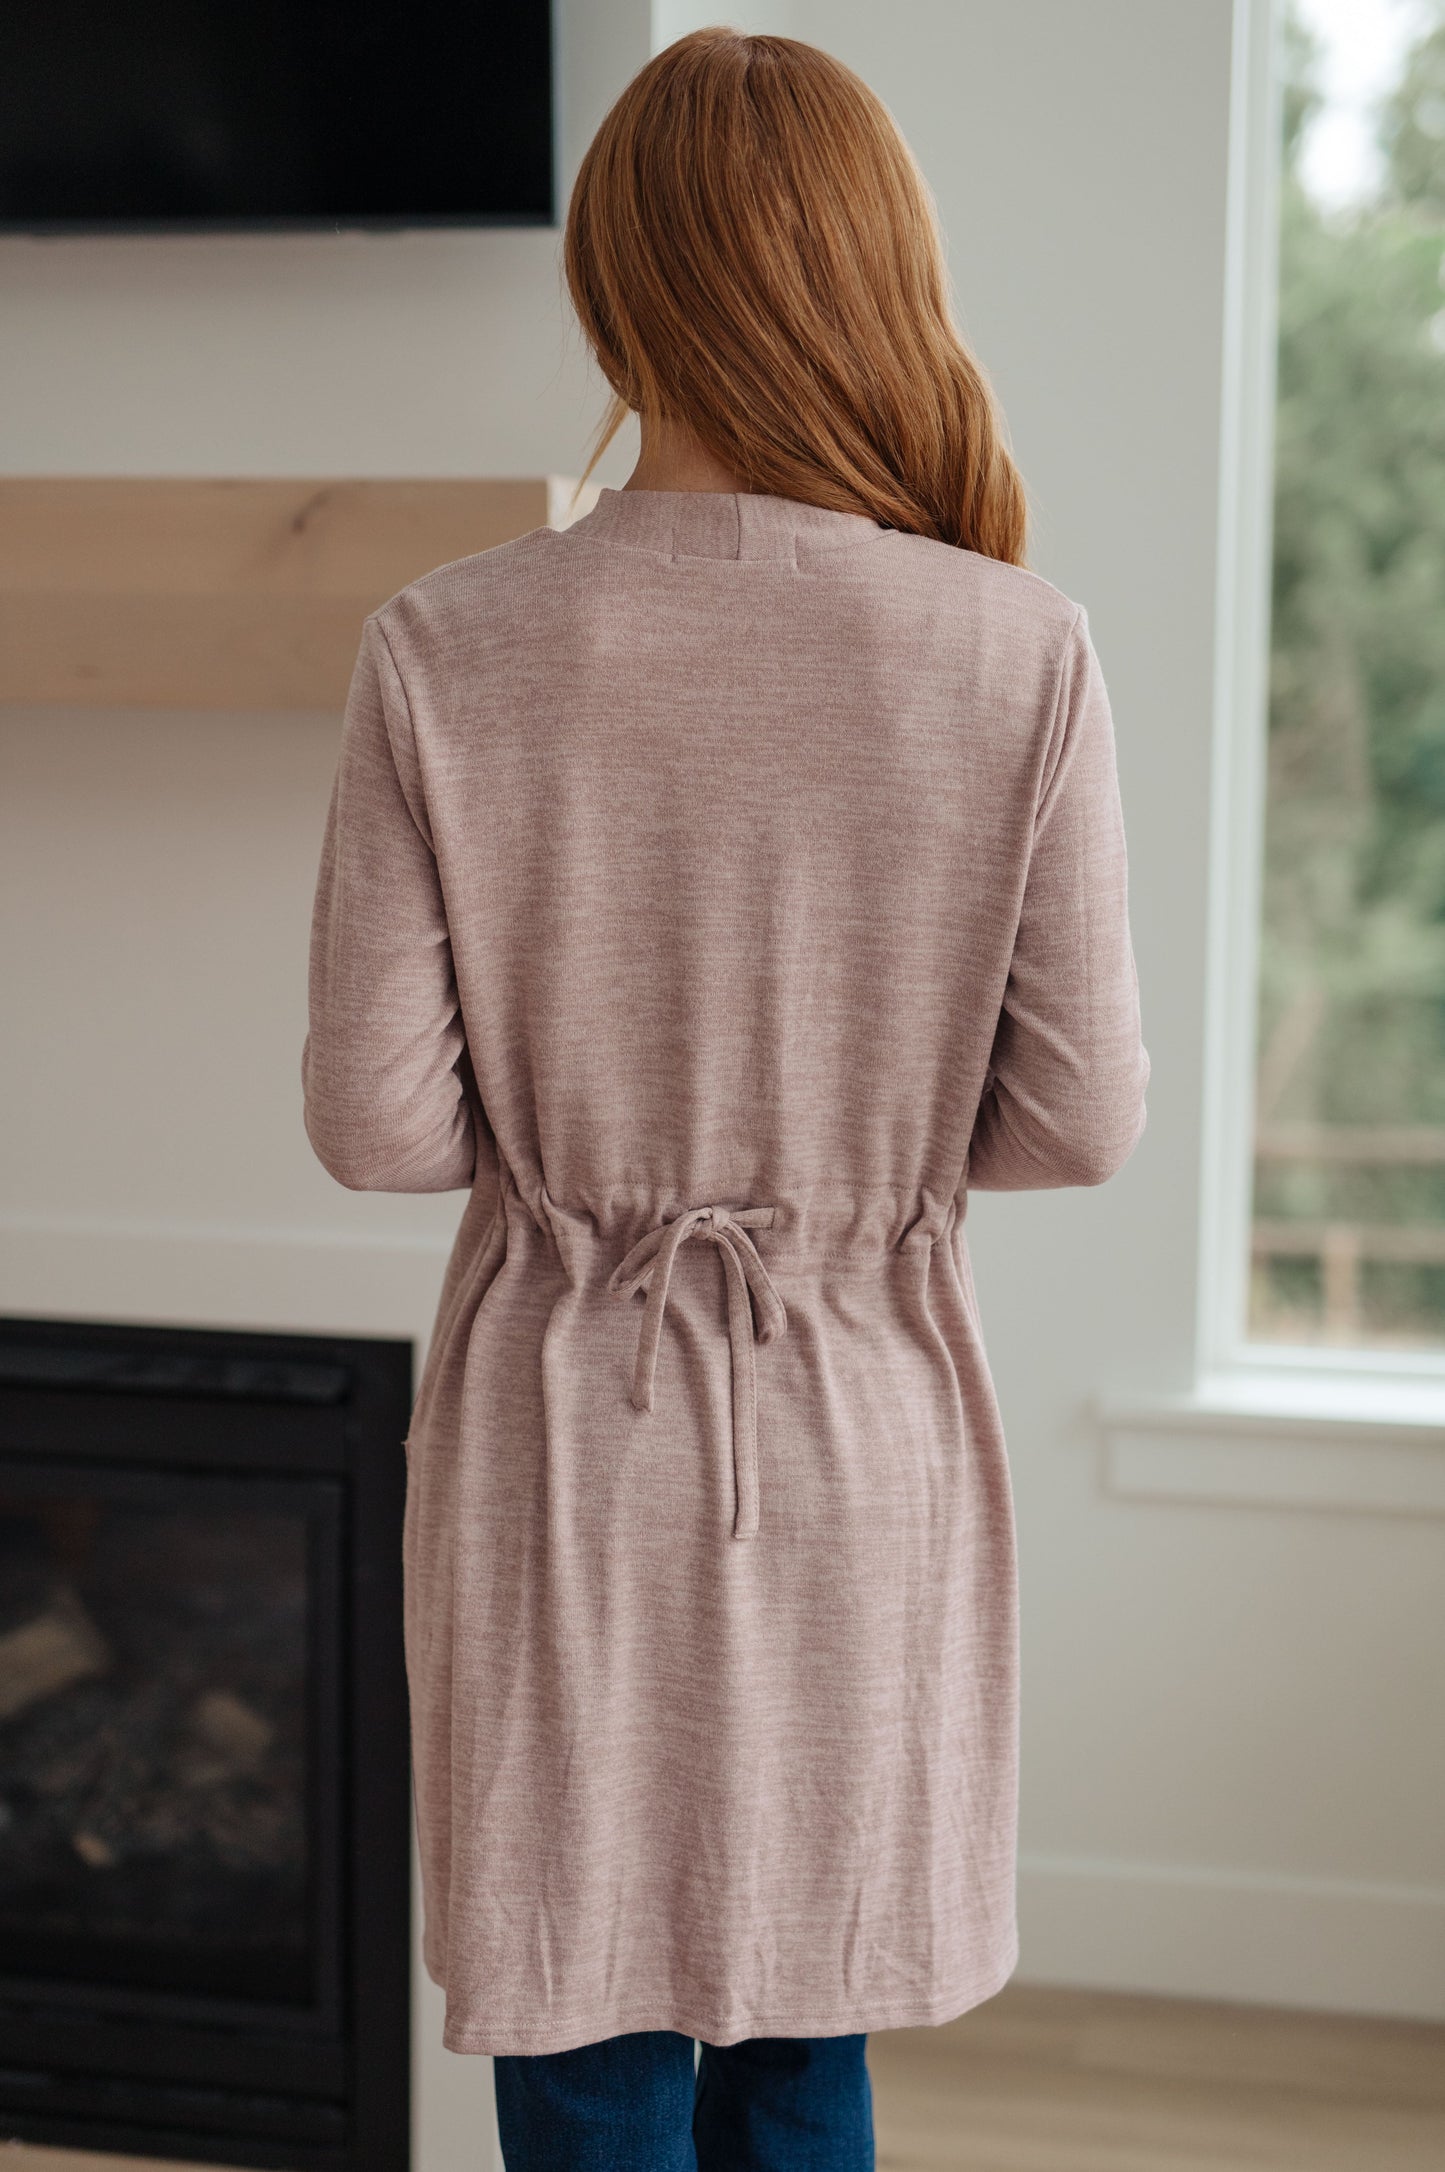 Our Staying Hopeful Cardigan is the perfect lightweight layer to add to your wardrobe. It features a sweater knit construction and an open front, with a drawstring in the back to cinch the waist for a more flattering shape. Perfect for cool days and evenings. S - 3X